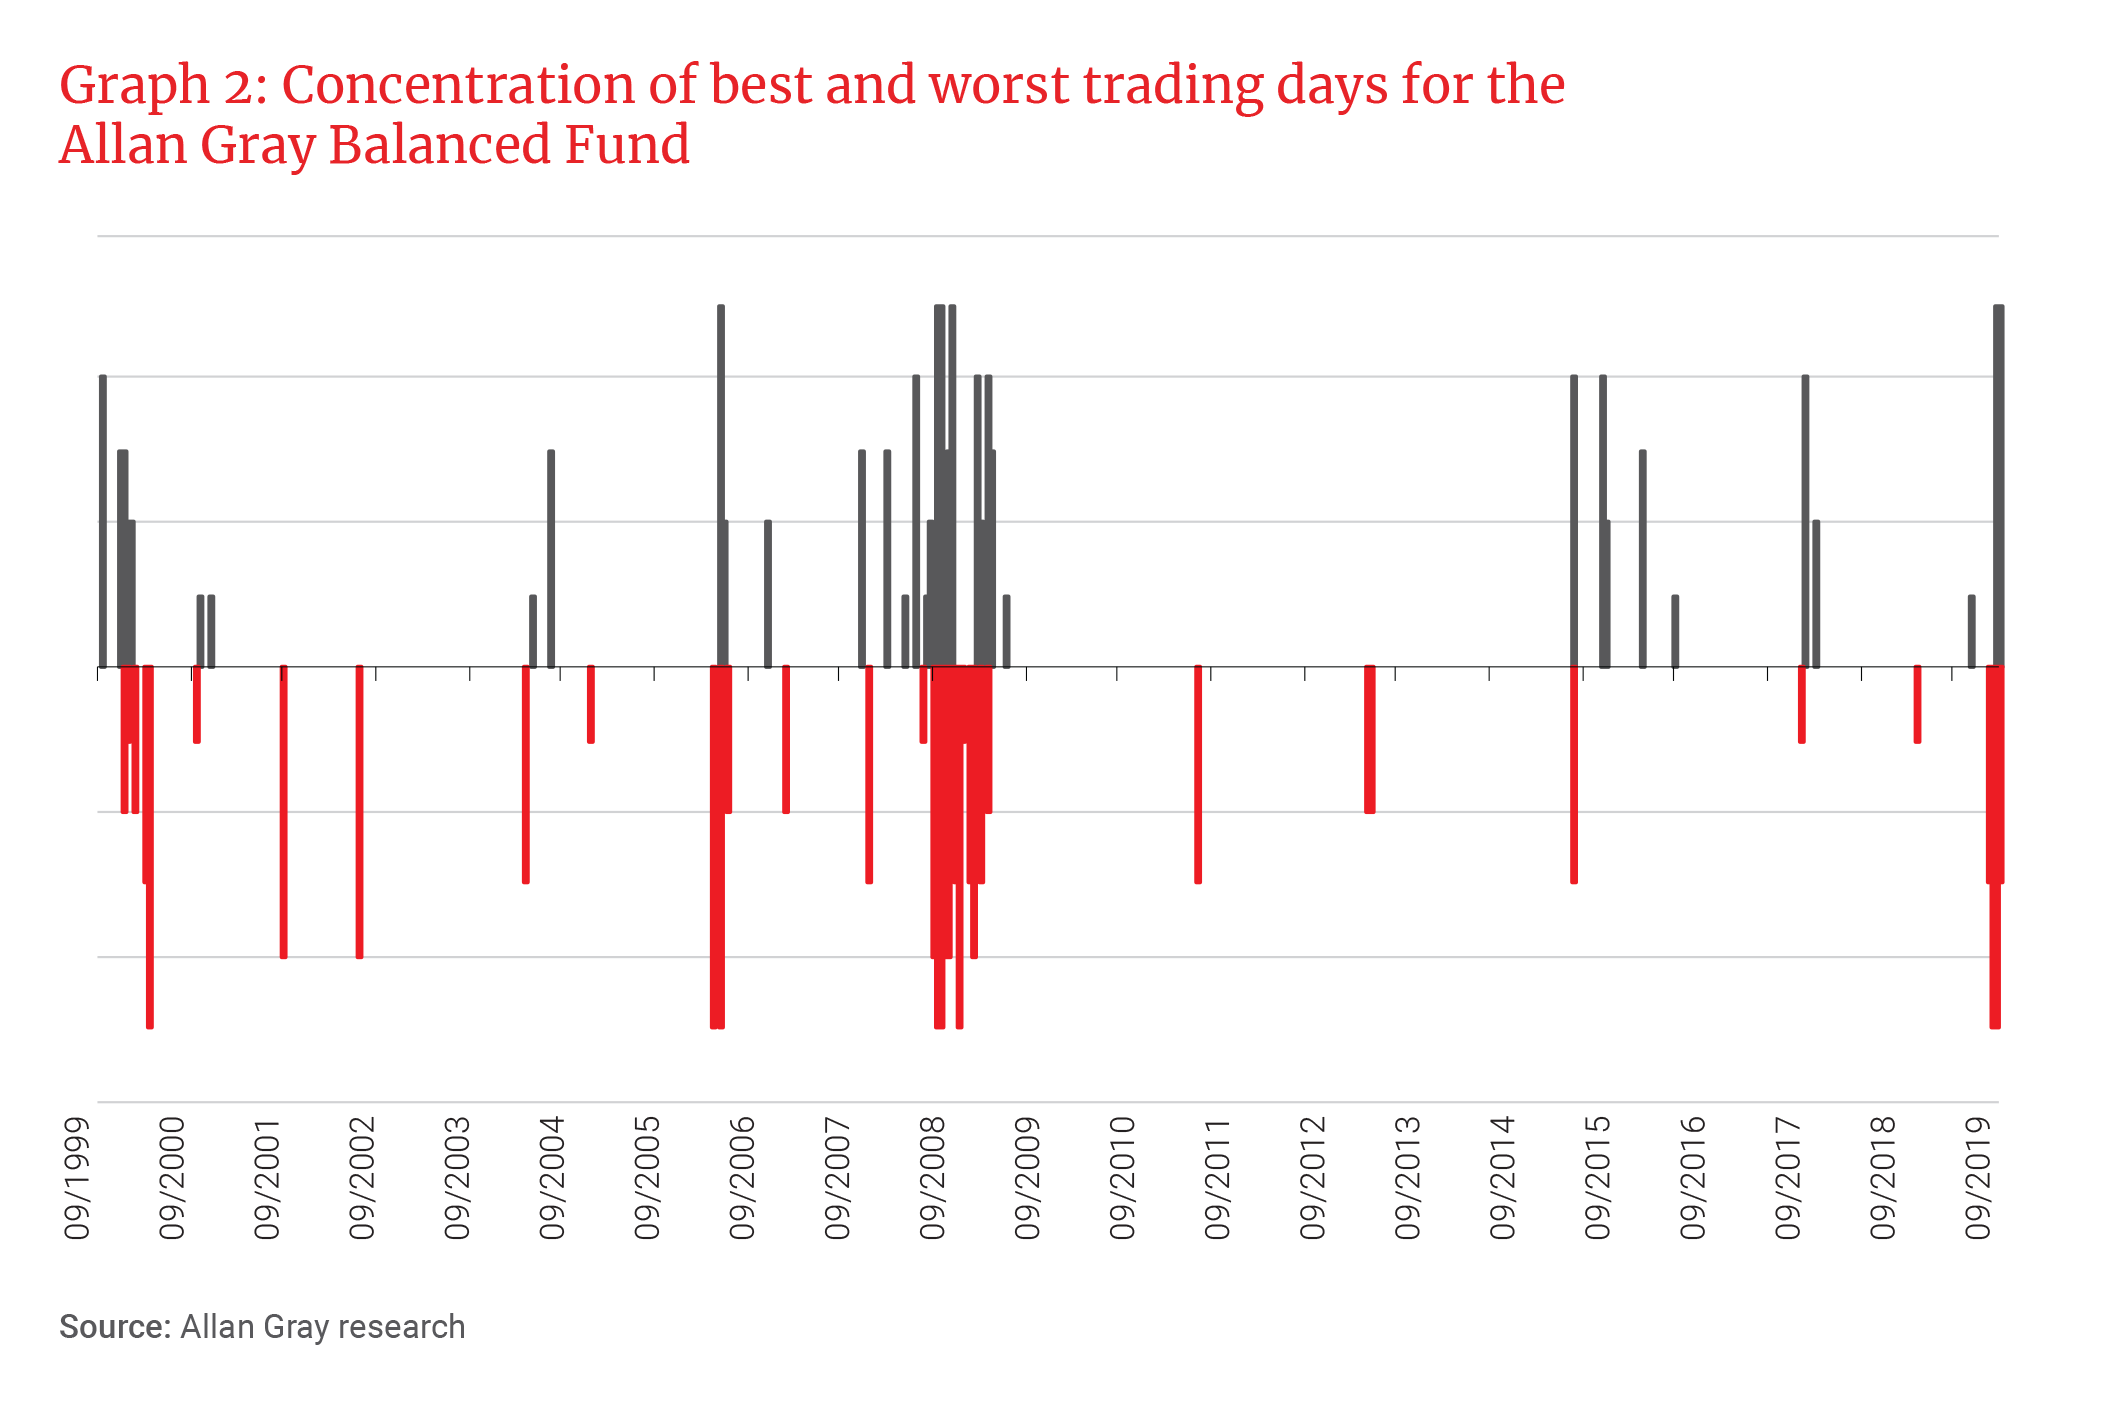 Concentration of best and worst trading days for the Allan Gray Balanced Fund